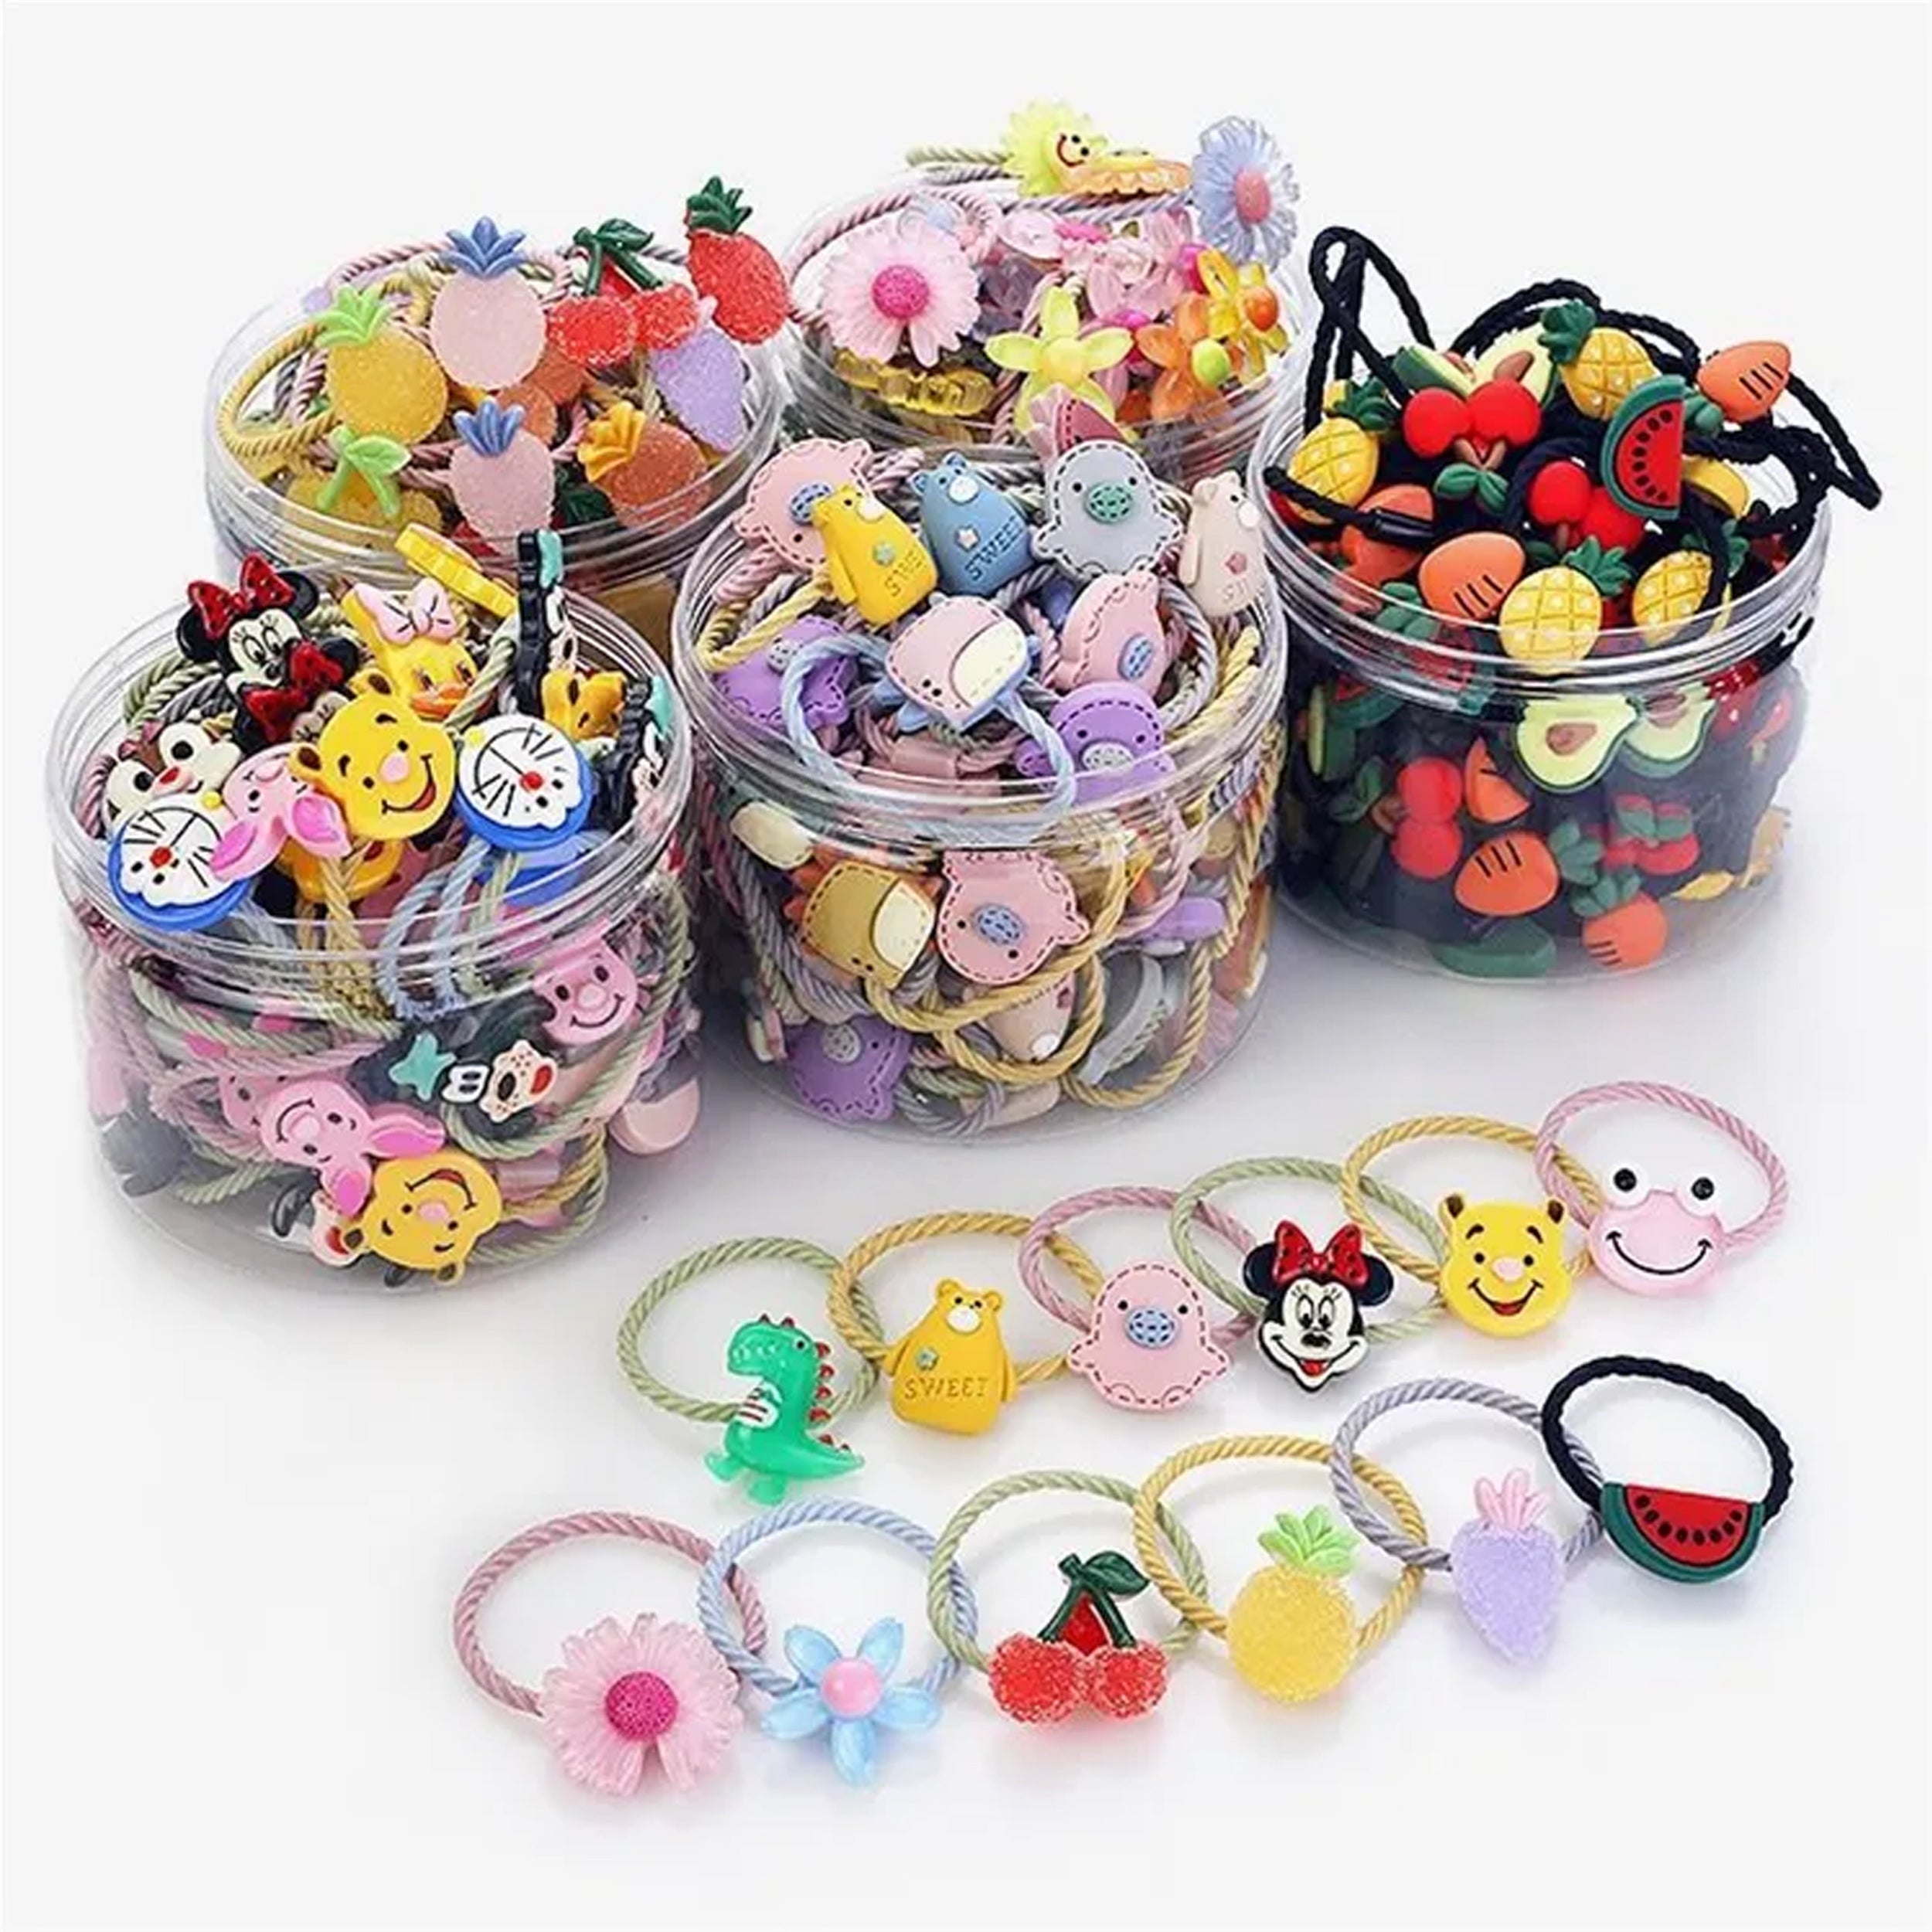 Get the Perfect Multi Fruits Resins Elastic Rubber Bands for Girls and Kids Accessories